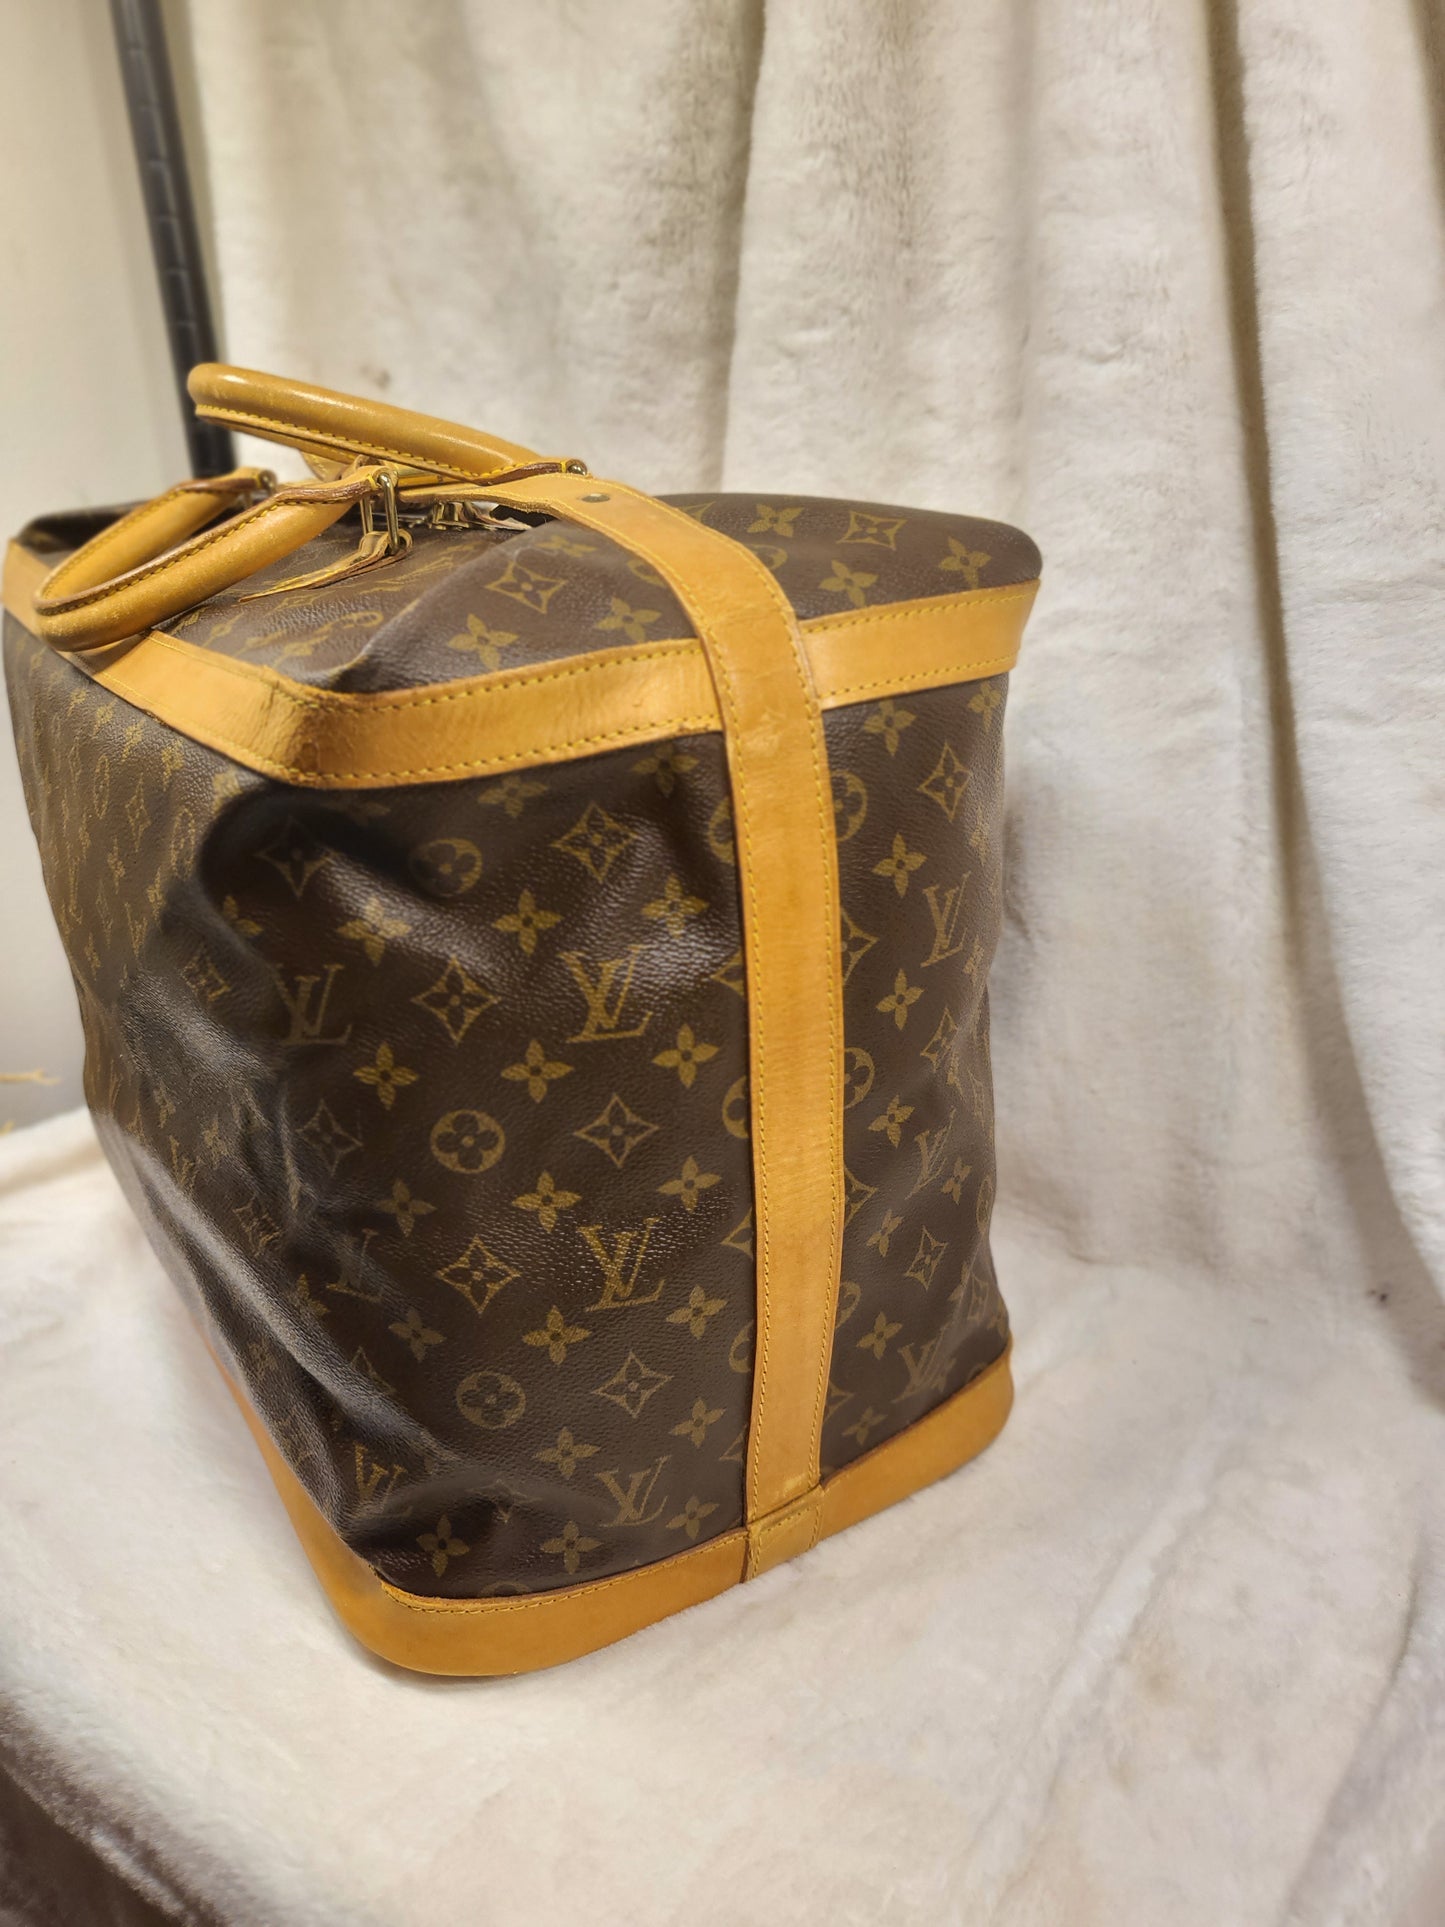 Authentic pre-owned Louis Vuitton Cruiser 45 luggage travel bag